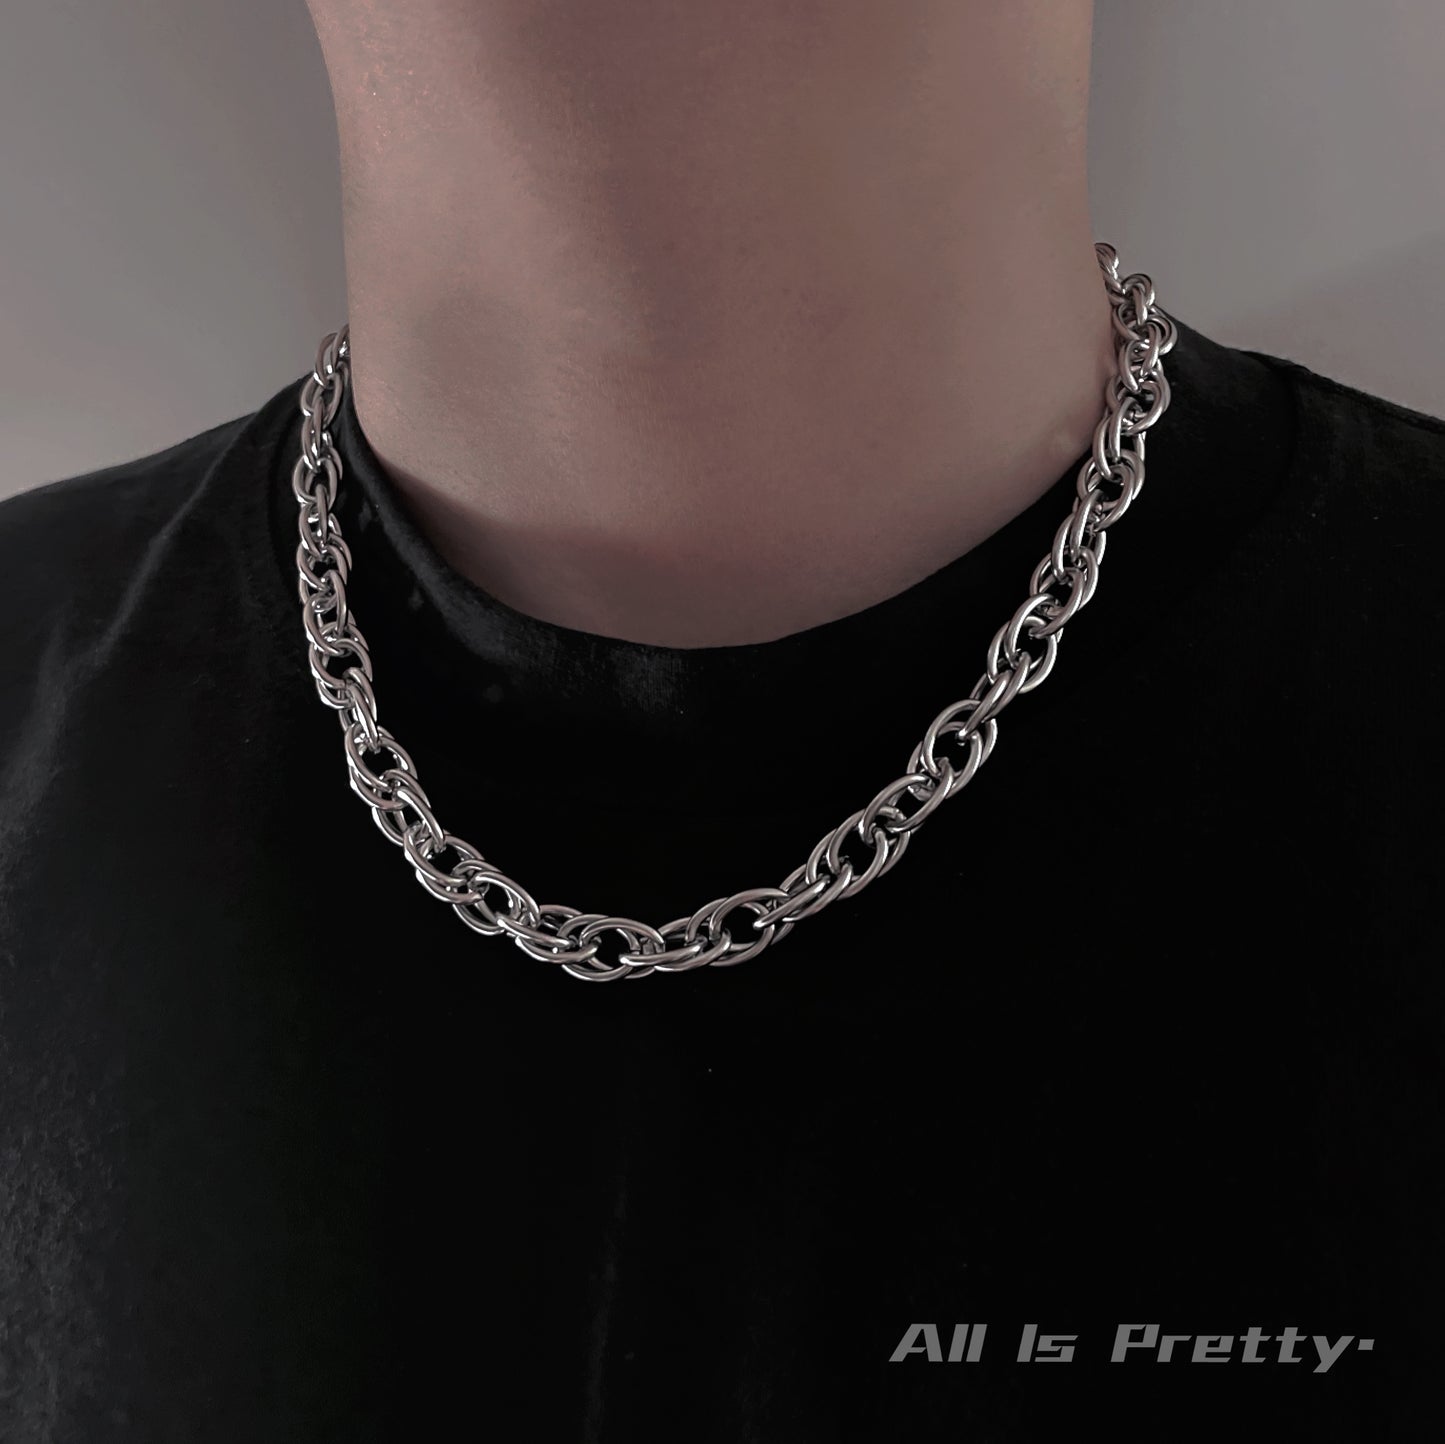 8mm unisex spica chain necklace